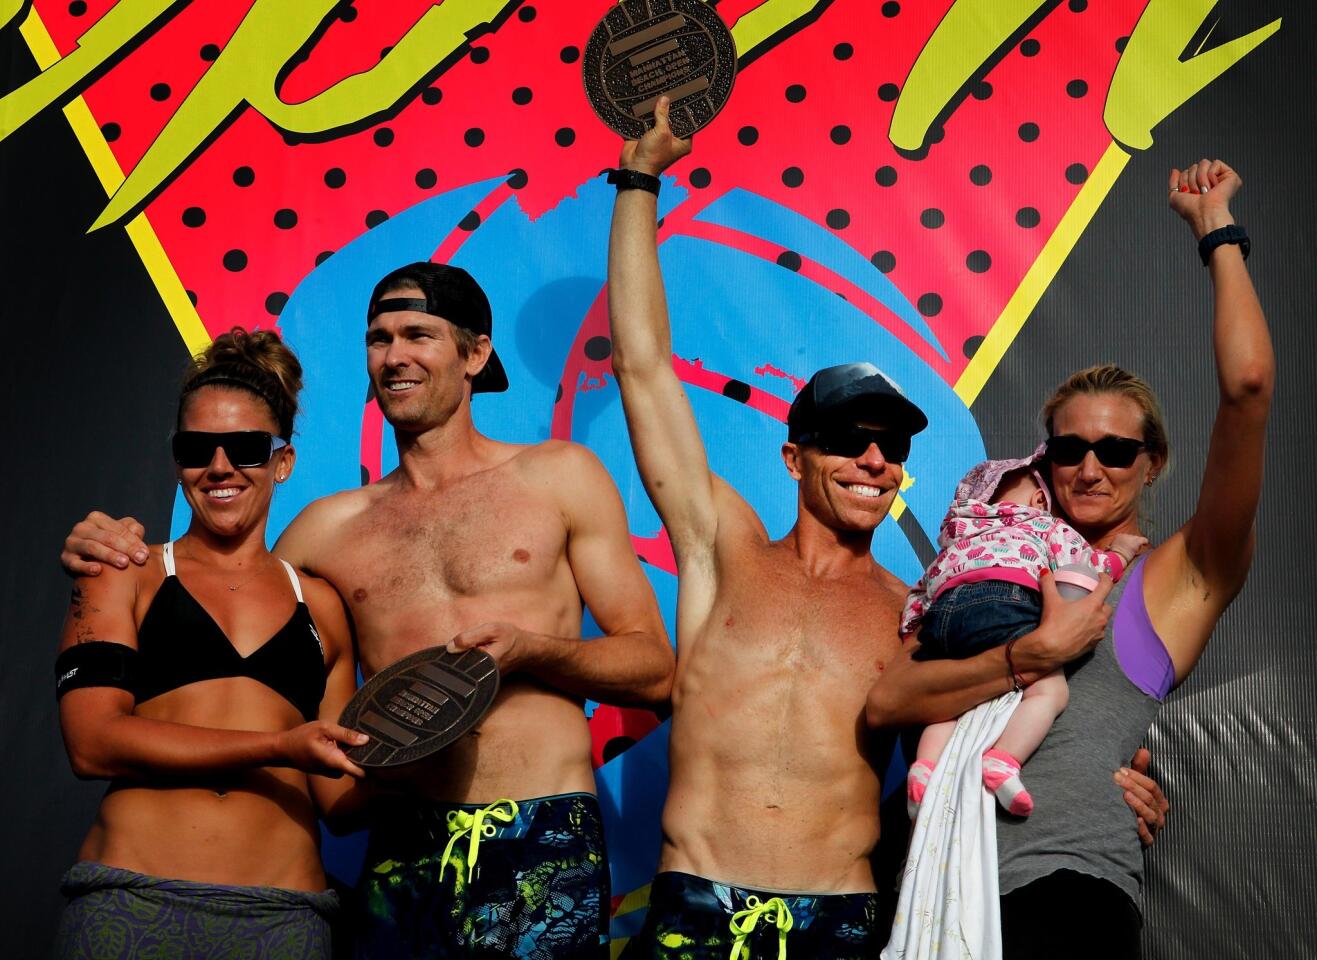 Whitney Pavlik, Matt Fuebringer, Casey Jennings, and Kerri Walsh (left to right) -- holding baby Scout that she had with husband Casey Jennings -- stand at the podium after winning at the Manhattan Beach Open Volleyball finals on Aug. 25, 2013.